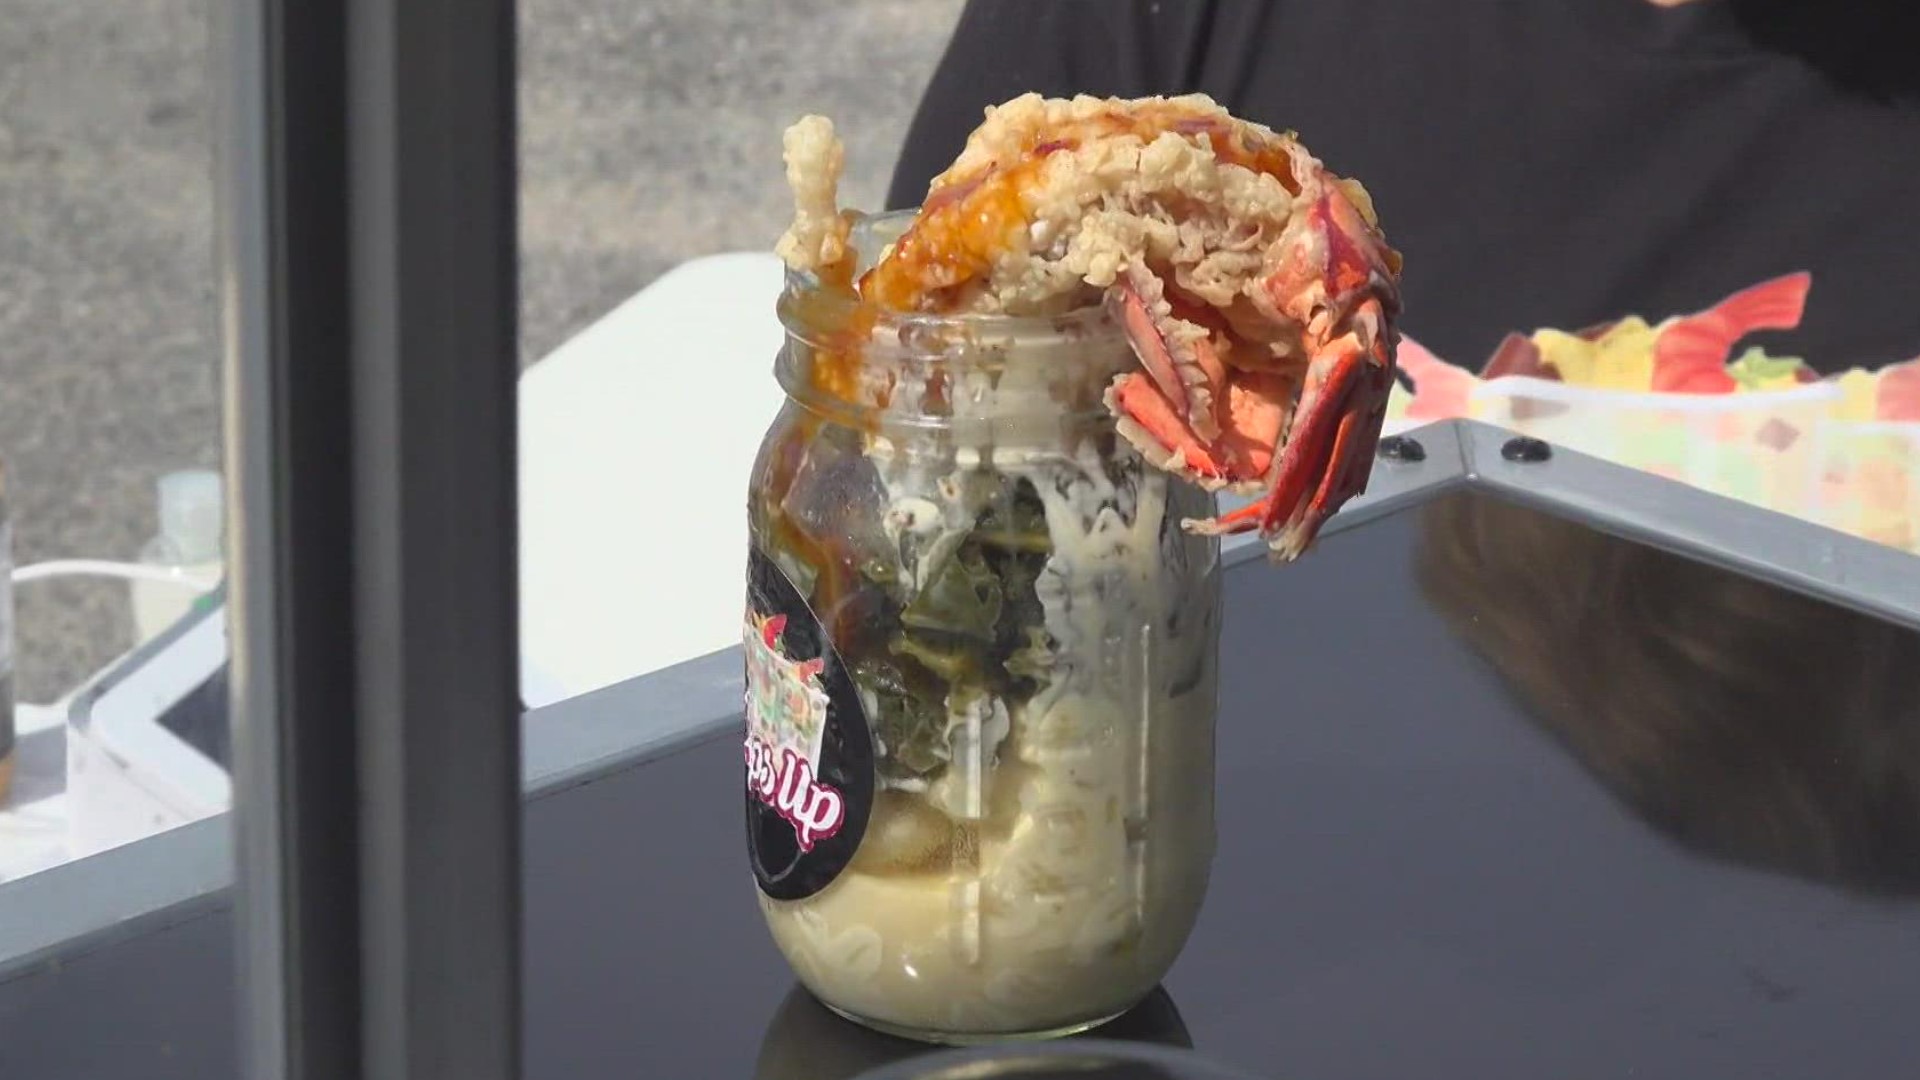 Cups Up is a food truck that offers anything from lobster tail, mac and cheese, truffle fries and more, all inside a cup to enjoy.